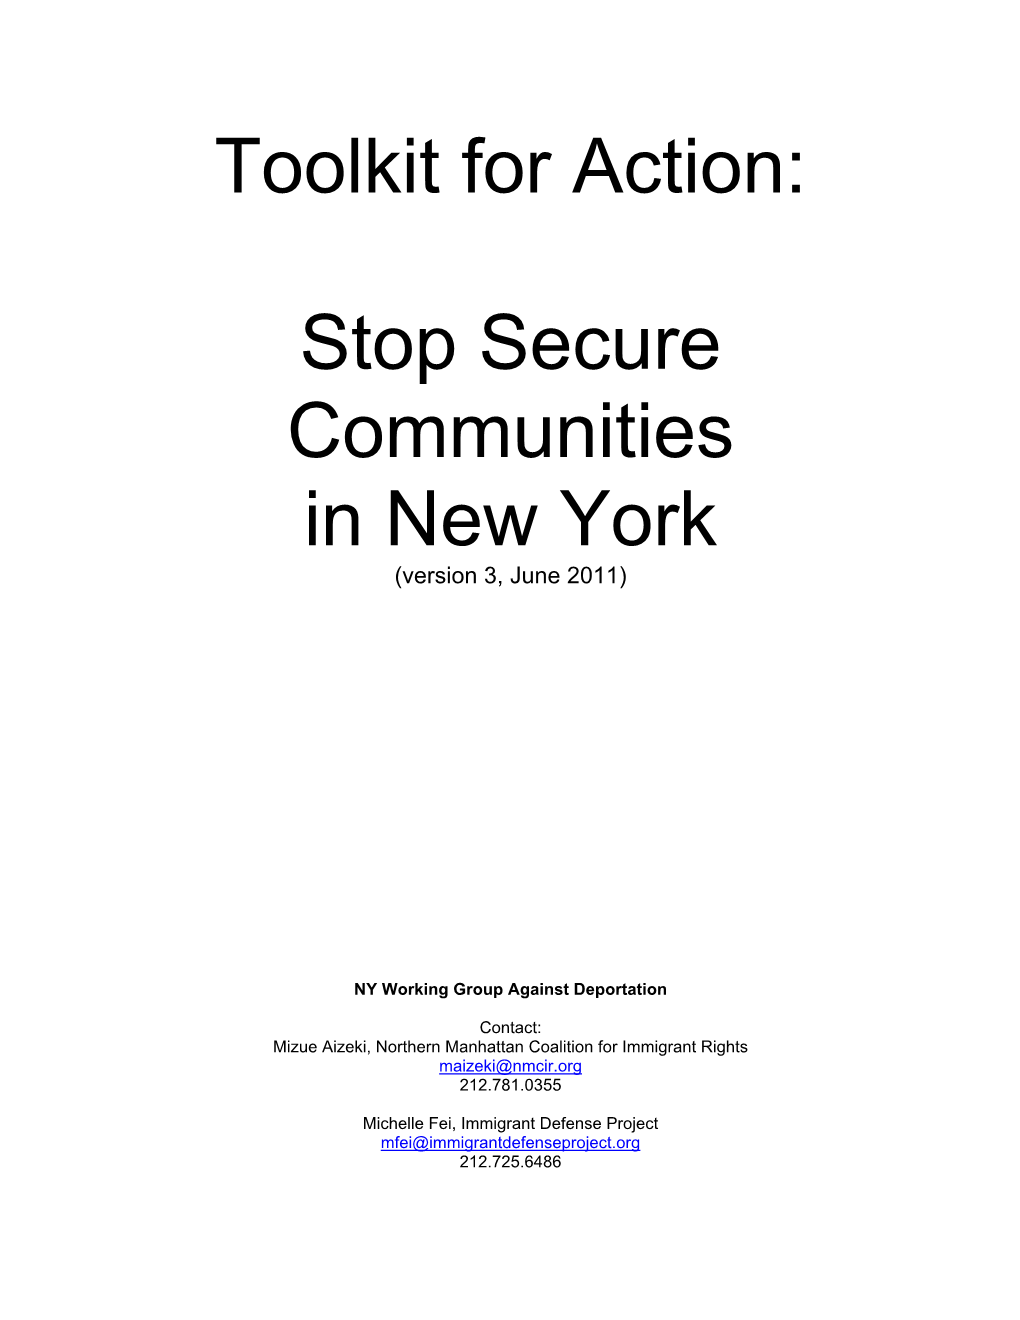 Toolkit for Action: Stop Secure Communities in New York